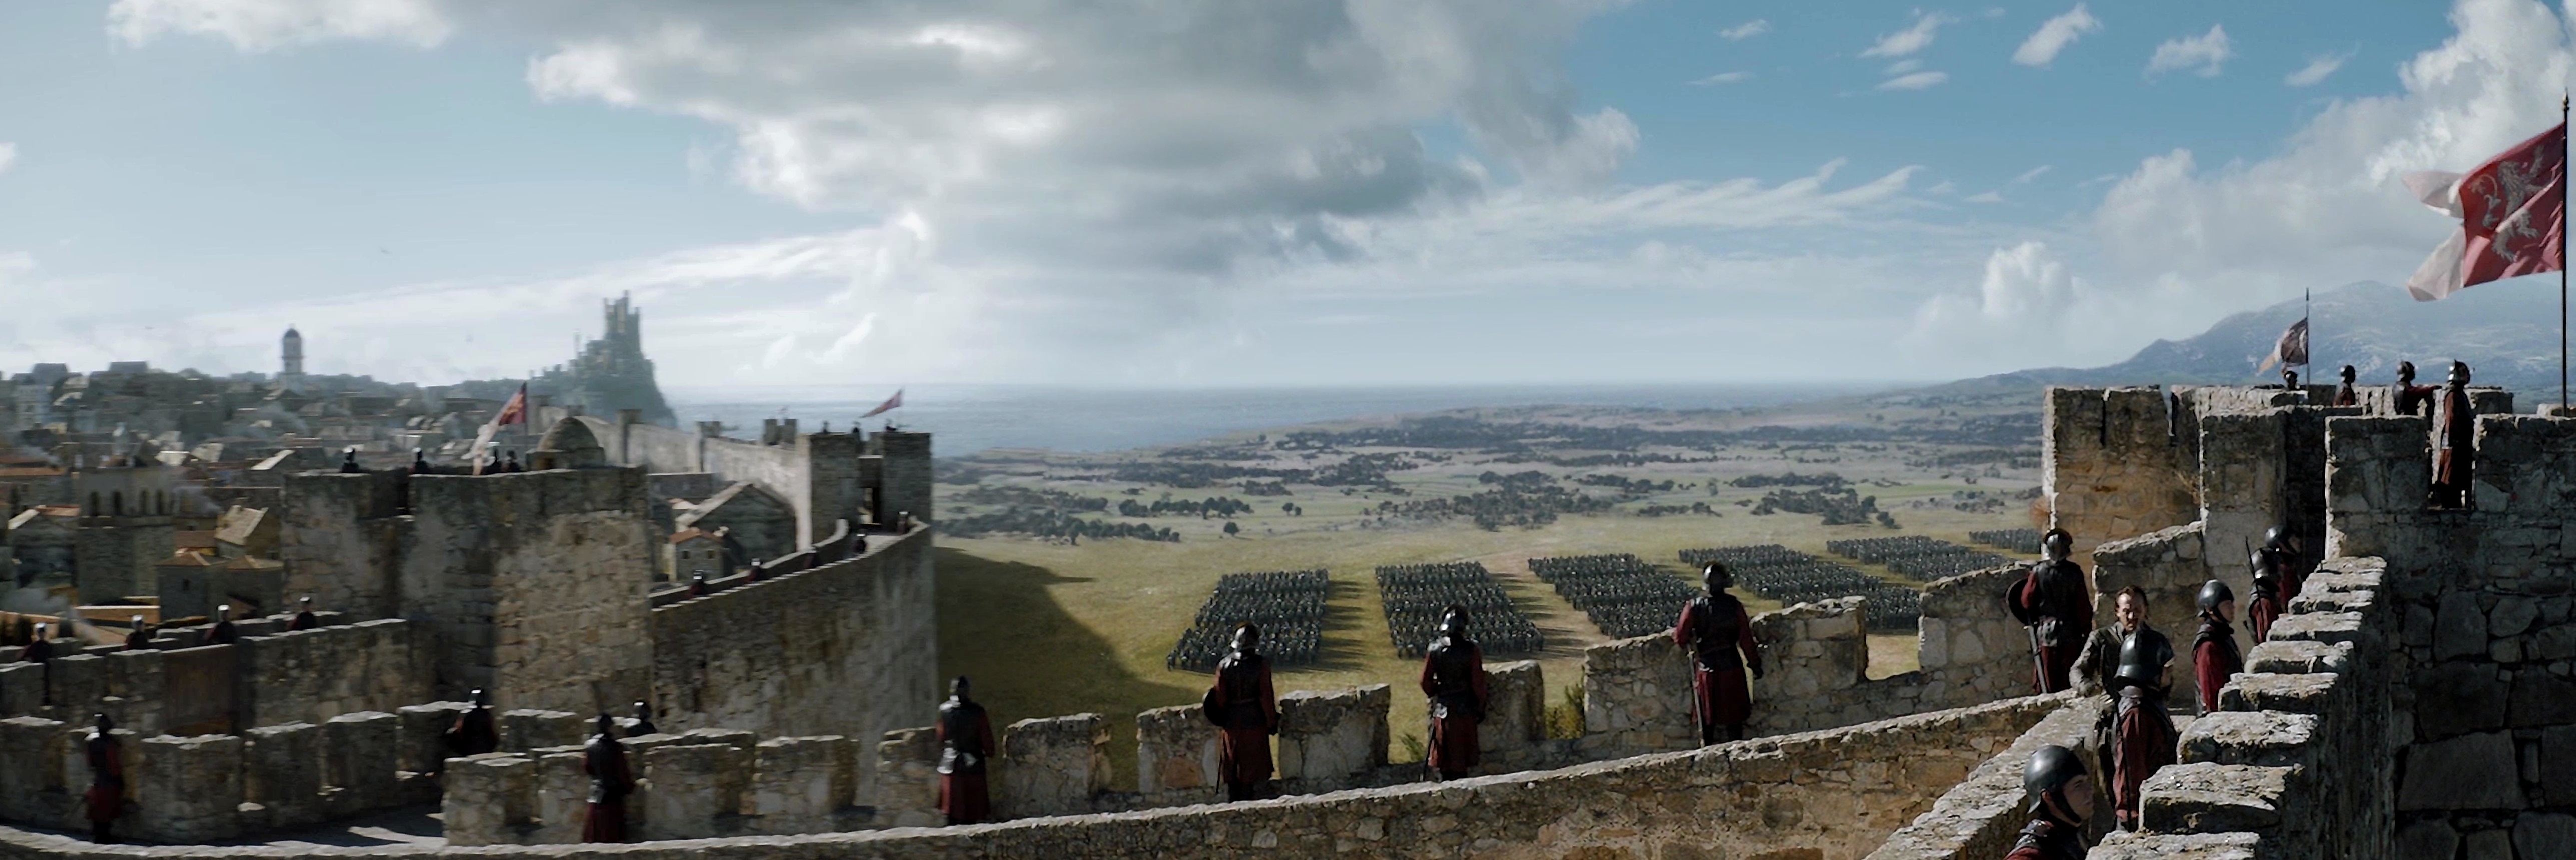 Panorama of the King's Landing walls  in the Season 7 finale, "The Dragon and the Wolf"